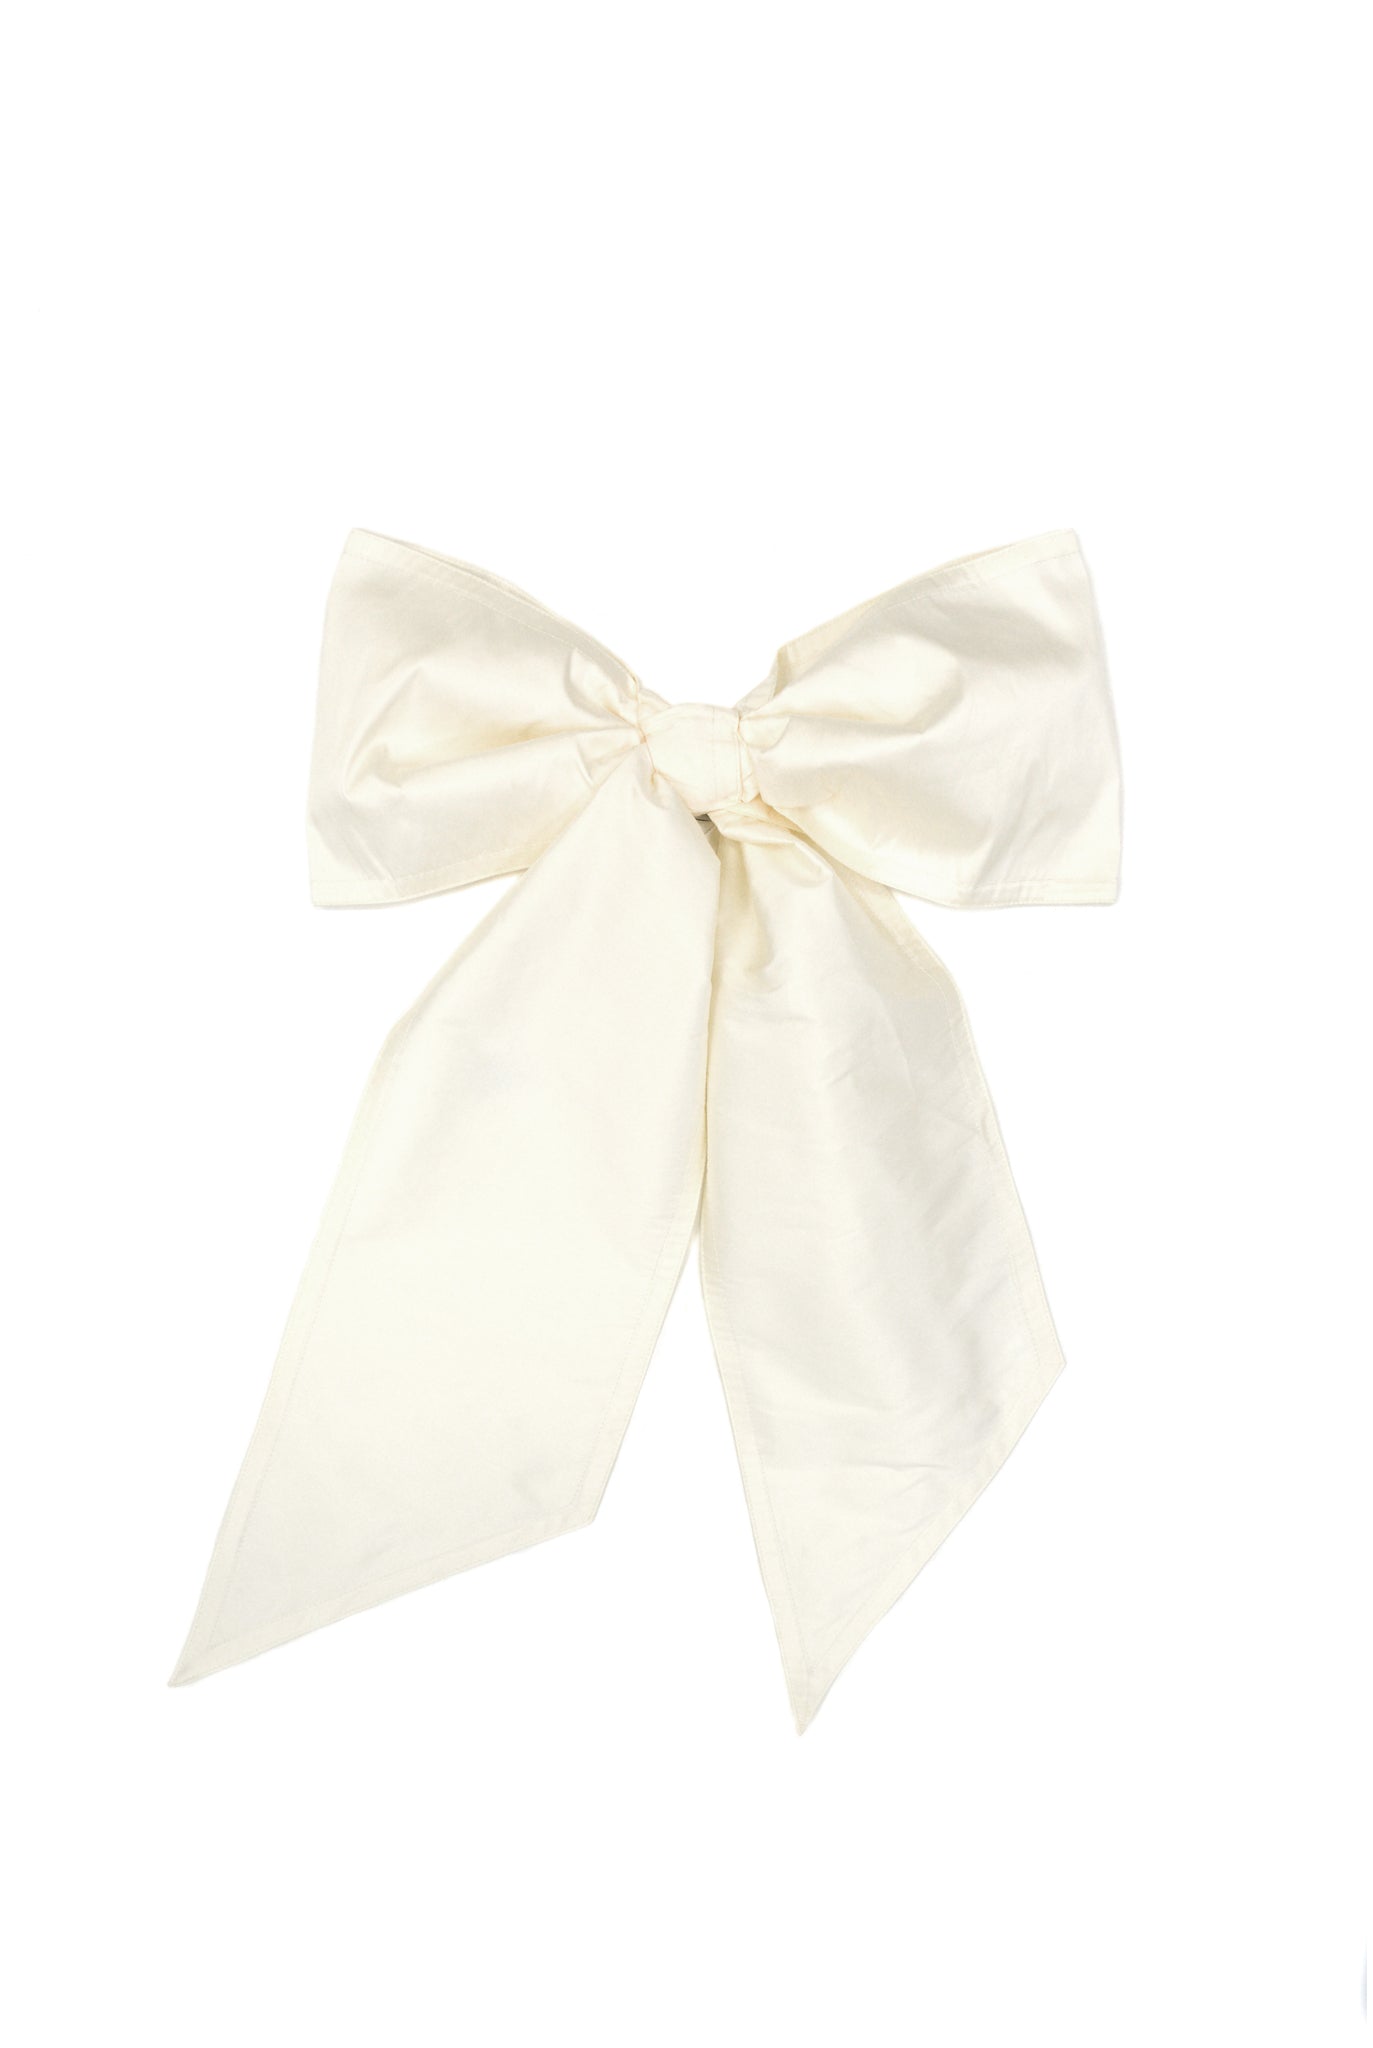 Vaquera Giant Hair Bow, Ivory